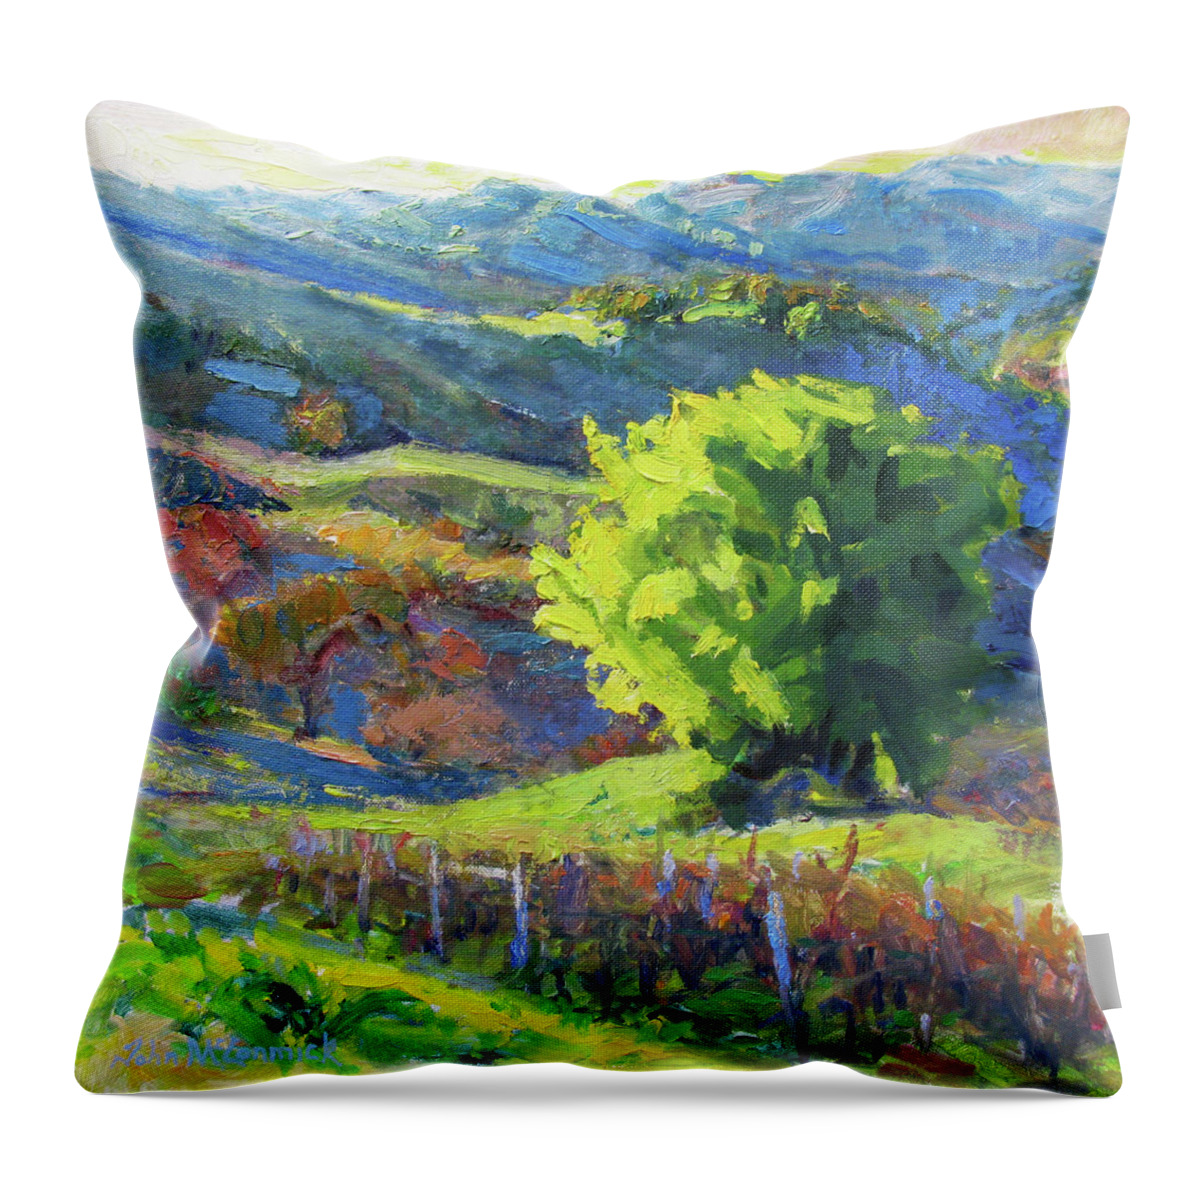 Oak Tree Throw Pillow featuring the painting Mountain Oak by John McCormick